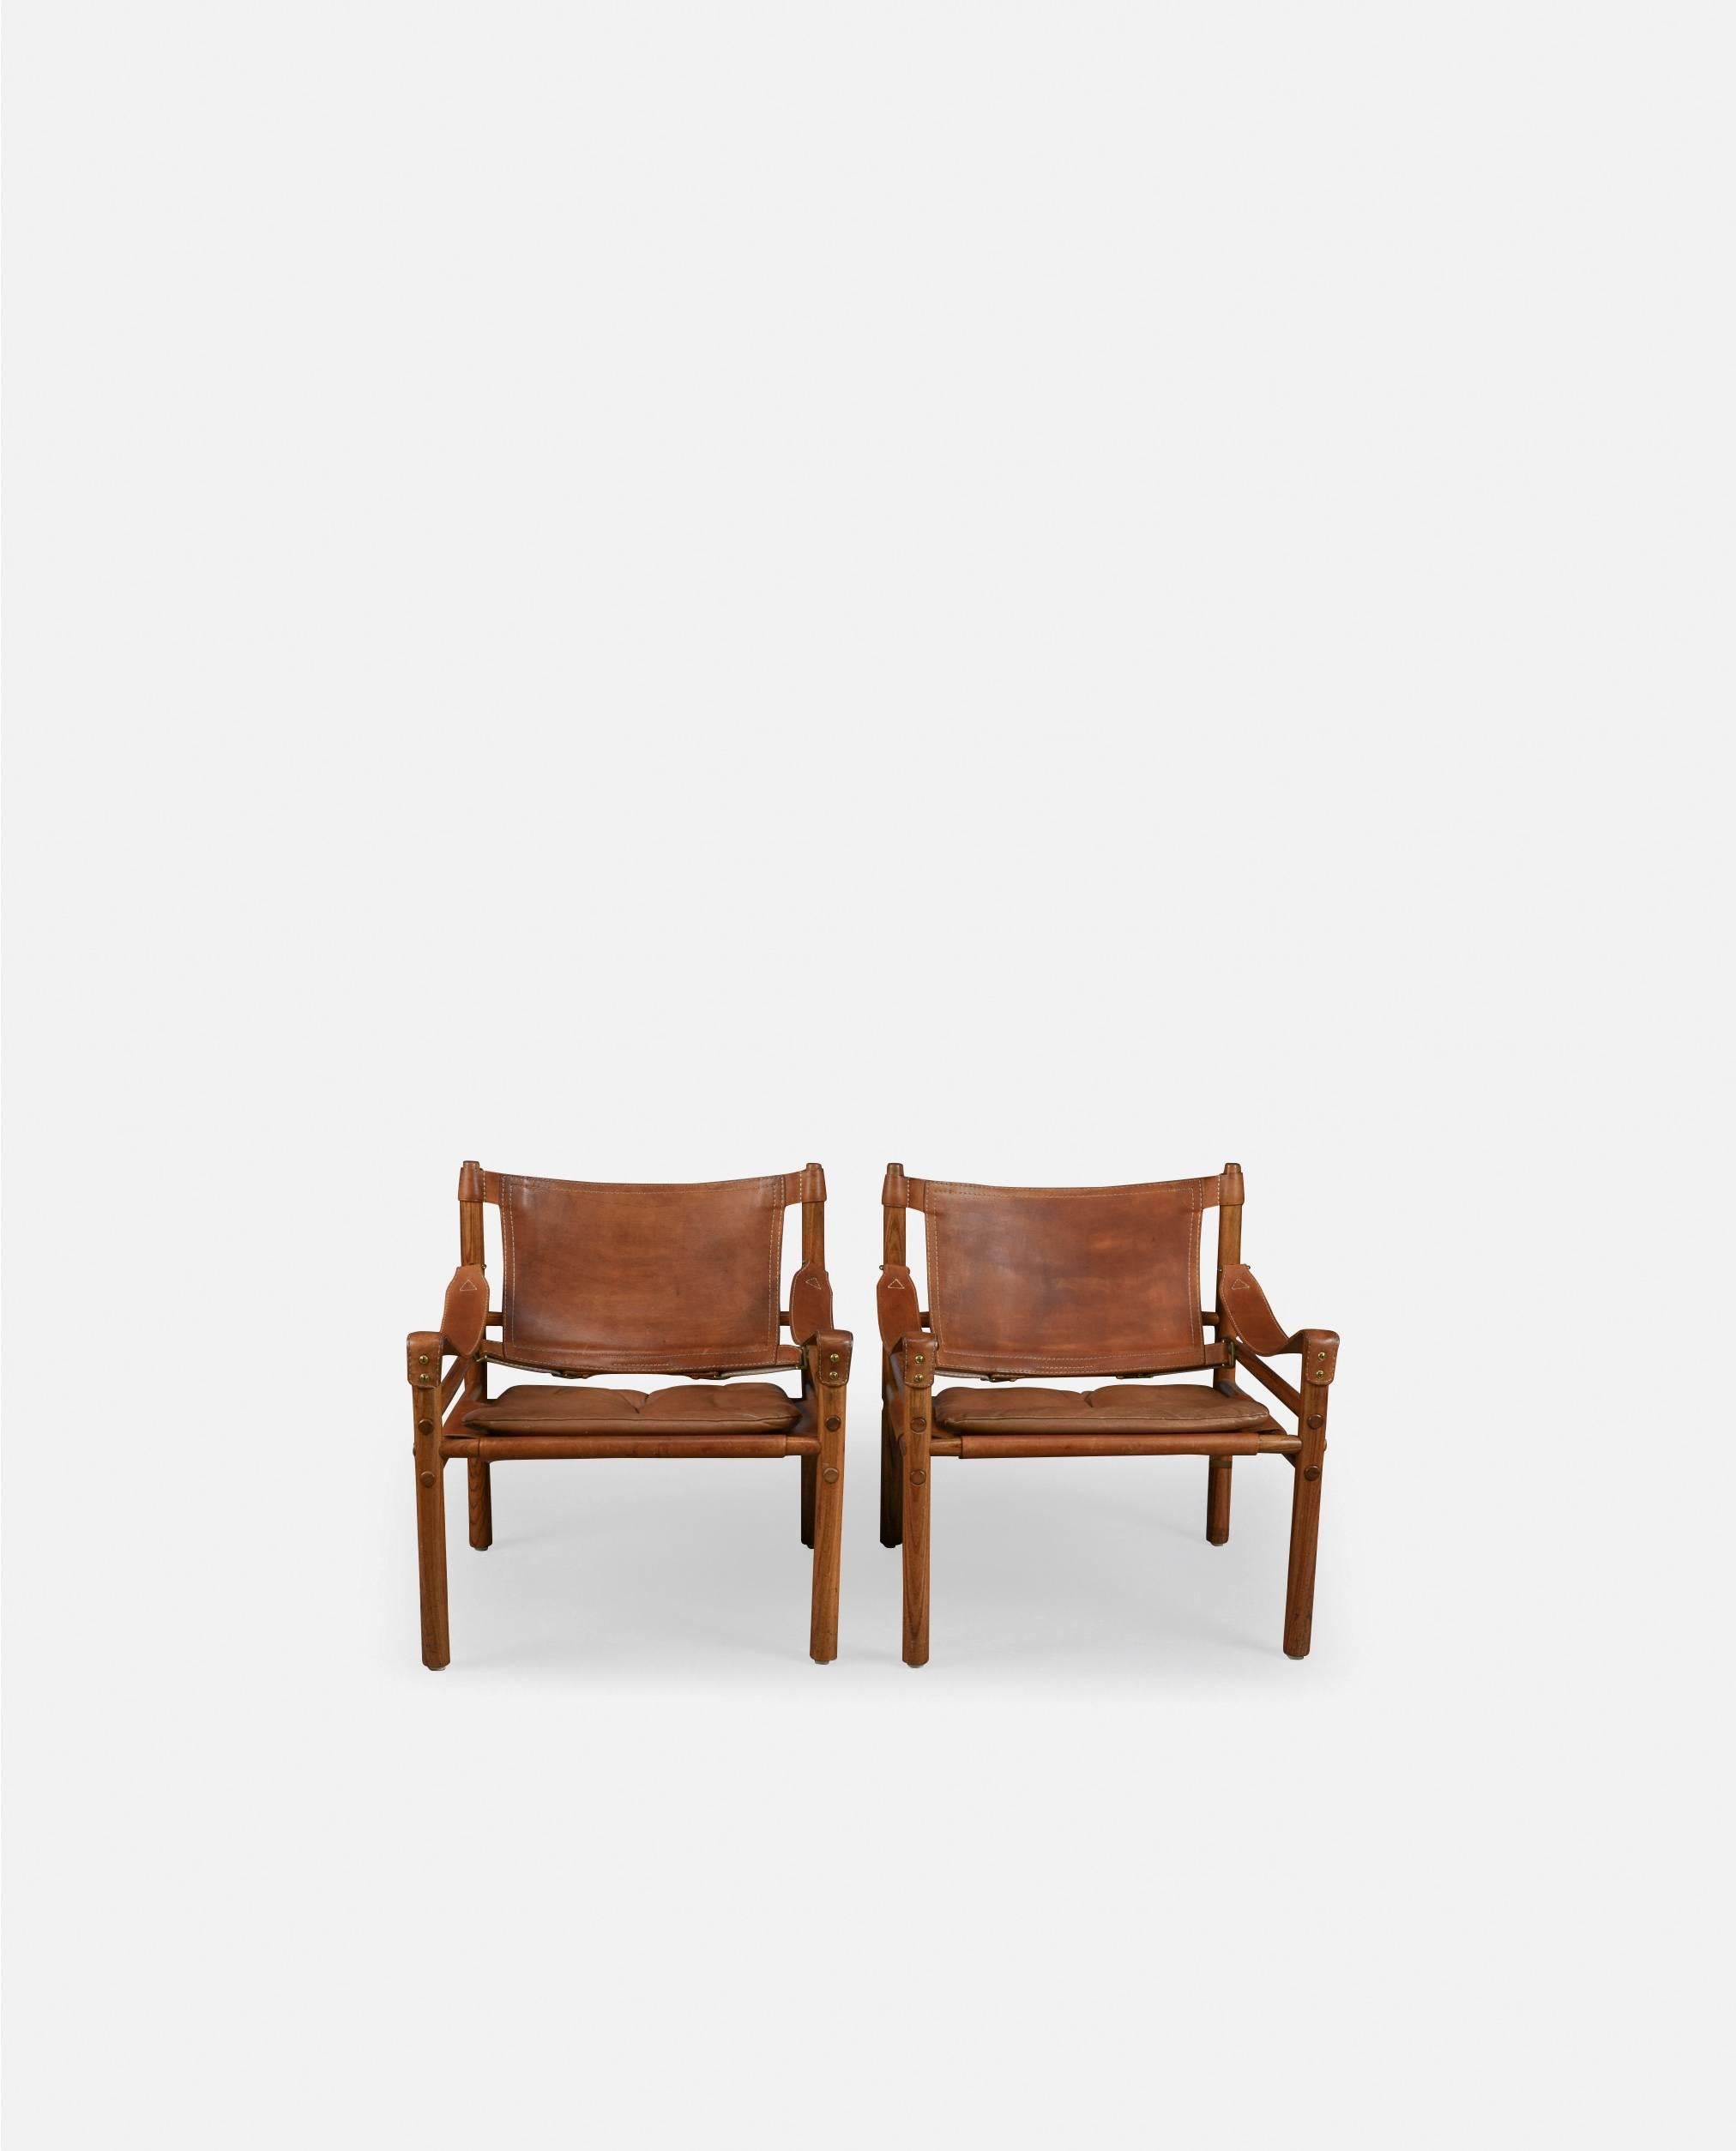 A beautiful original pair of Arne Norell safari sirocco chairs in rosewood and patinated brown leather, 1960s, Sweden. Made by Aneby Mobler, Sweden. Fast and inexpensive shipping worldwide. Will be disassembled for shipping but easy to assemble on